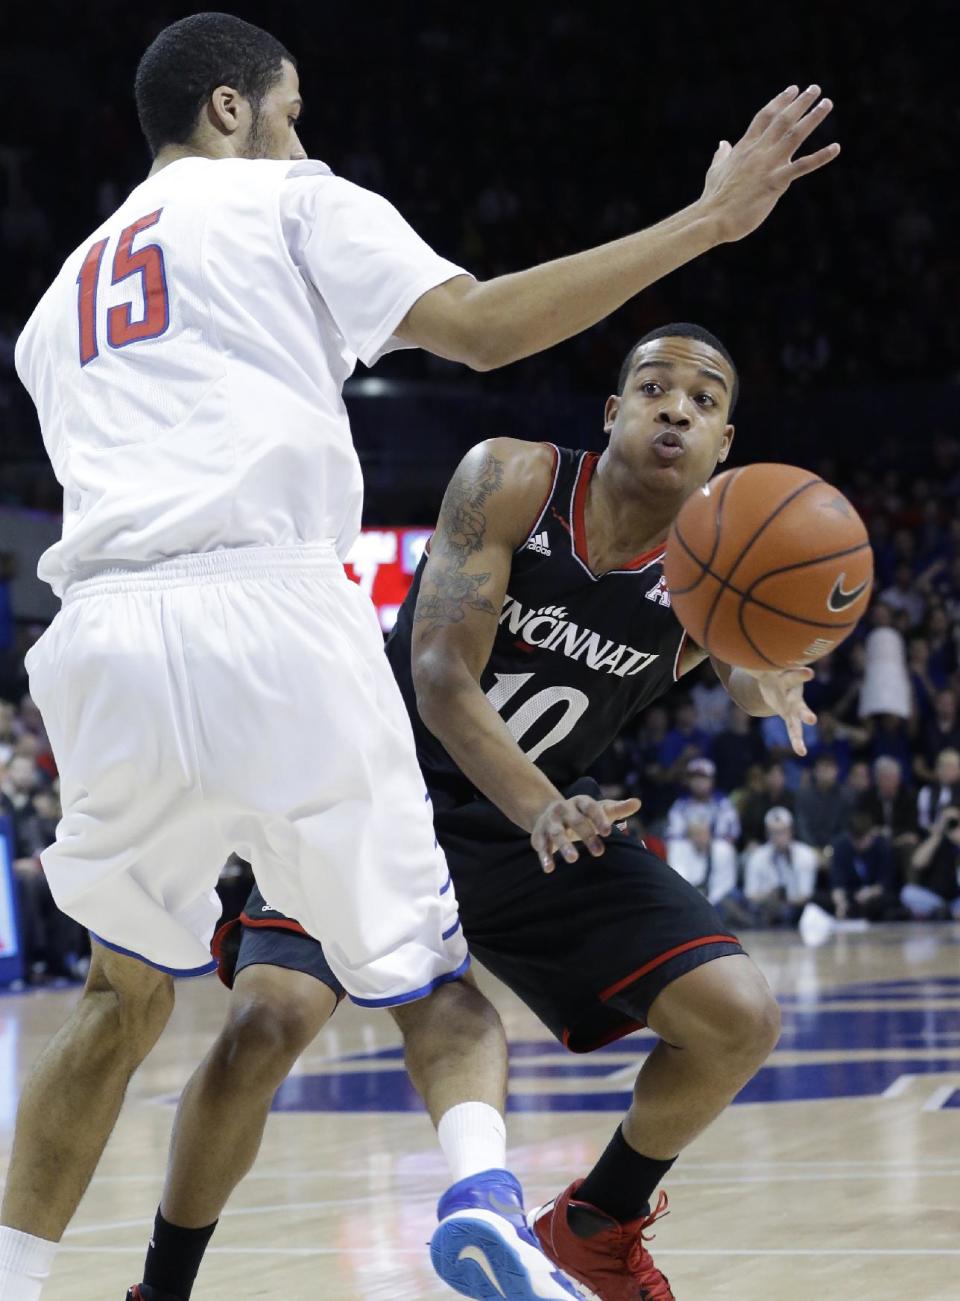 Cincinnati guard Troy Caupain (10) passes around SMU center Cannen Cunningham (15) during the first half of an NCAA college basketball game Saturday, Feb. 8, 2014, in Dallas. (AP Photo/LM Otero) vcb